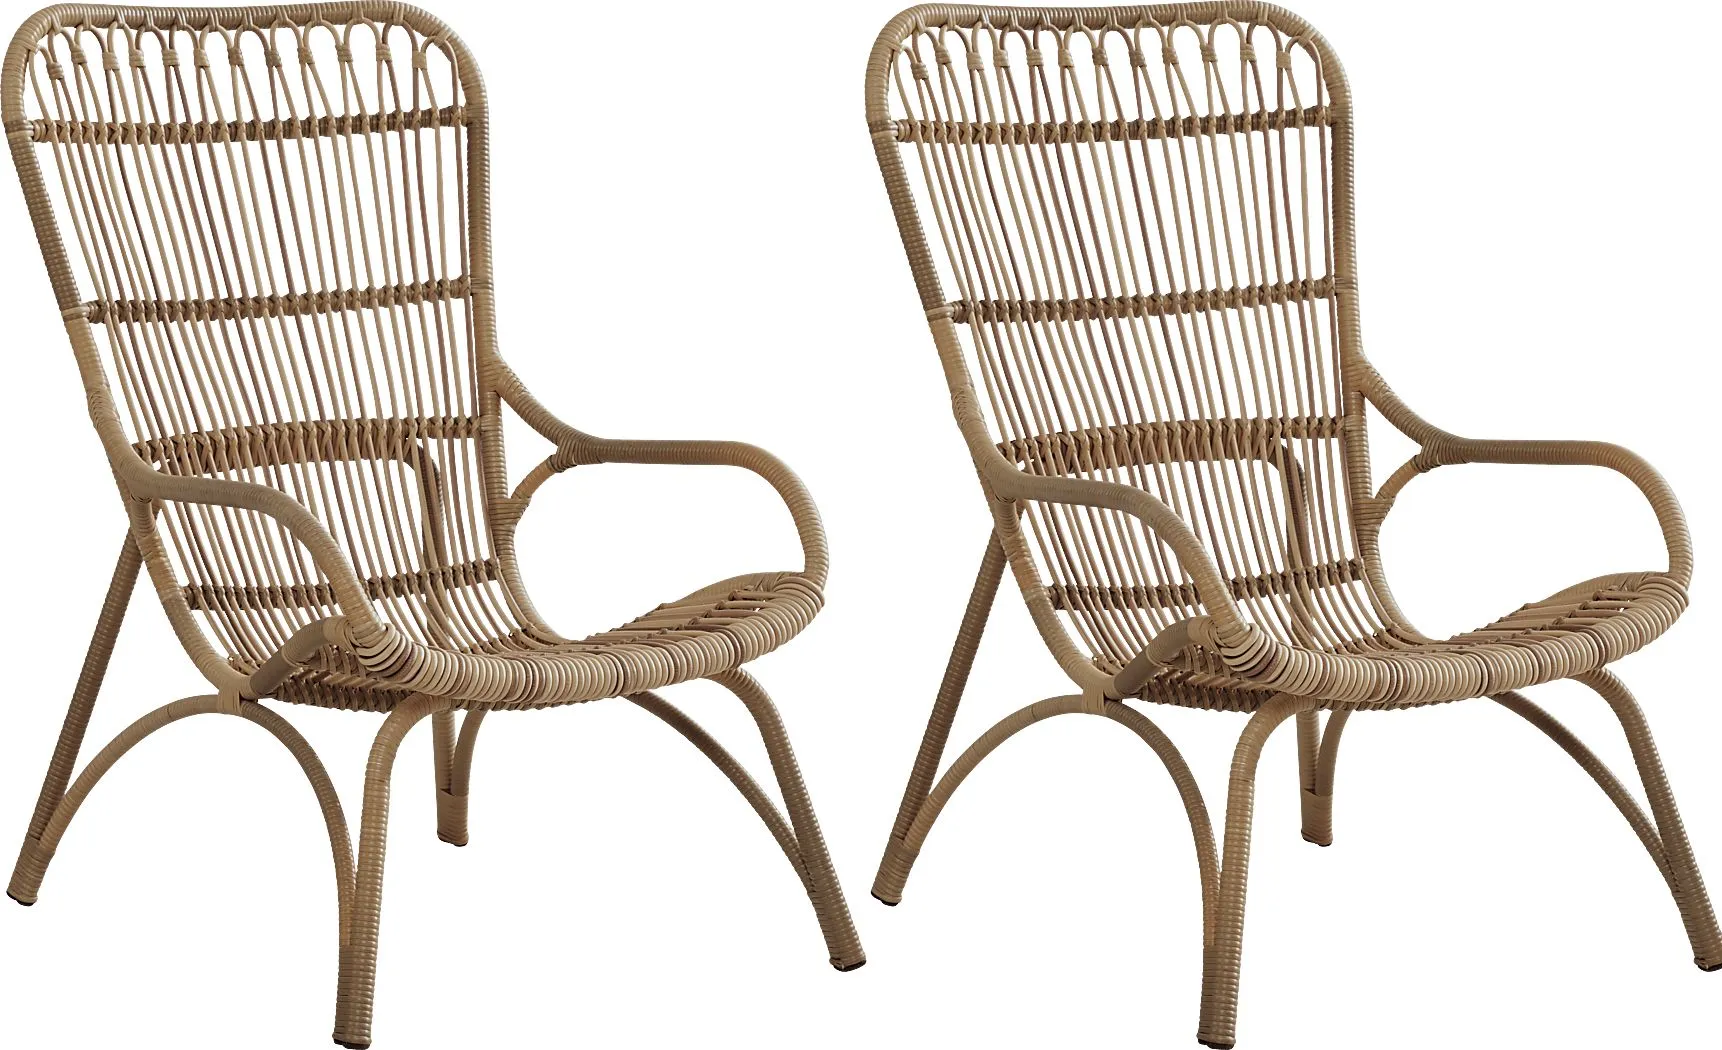 Kain Natural Outdoor Lounge Chairs, Set of Two